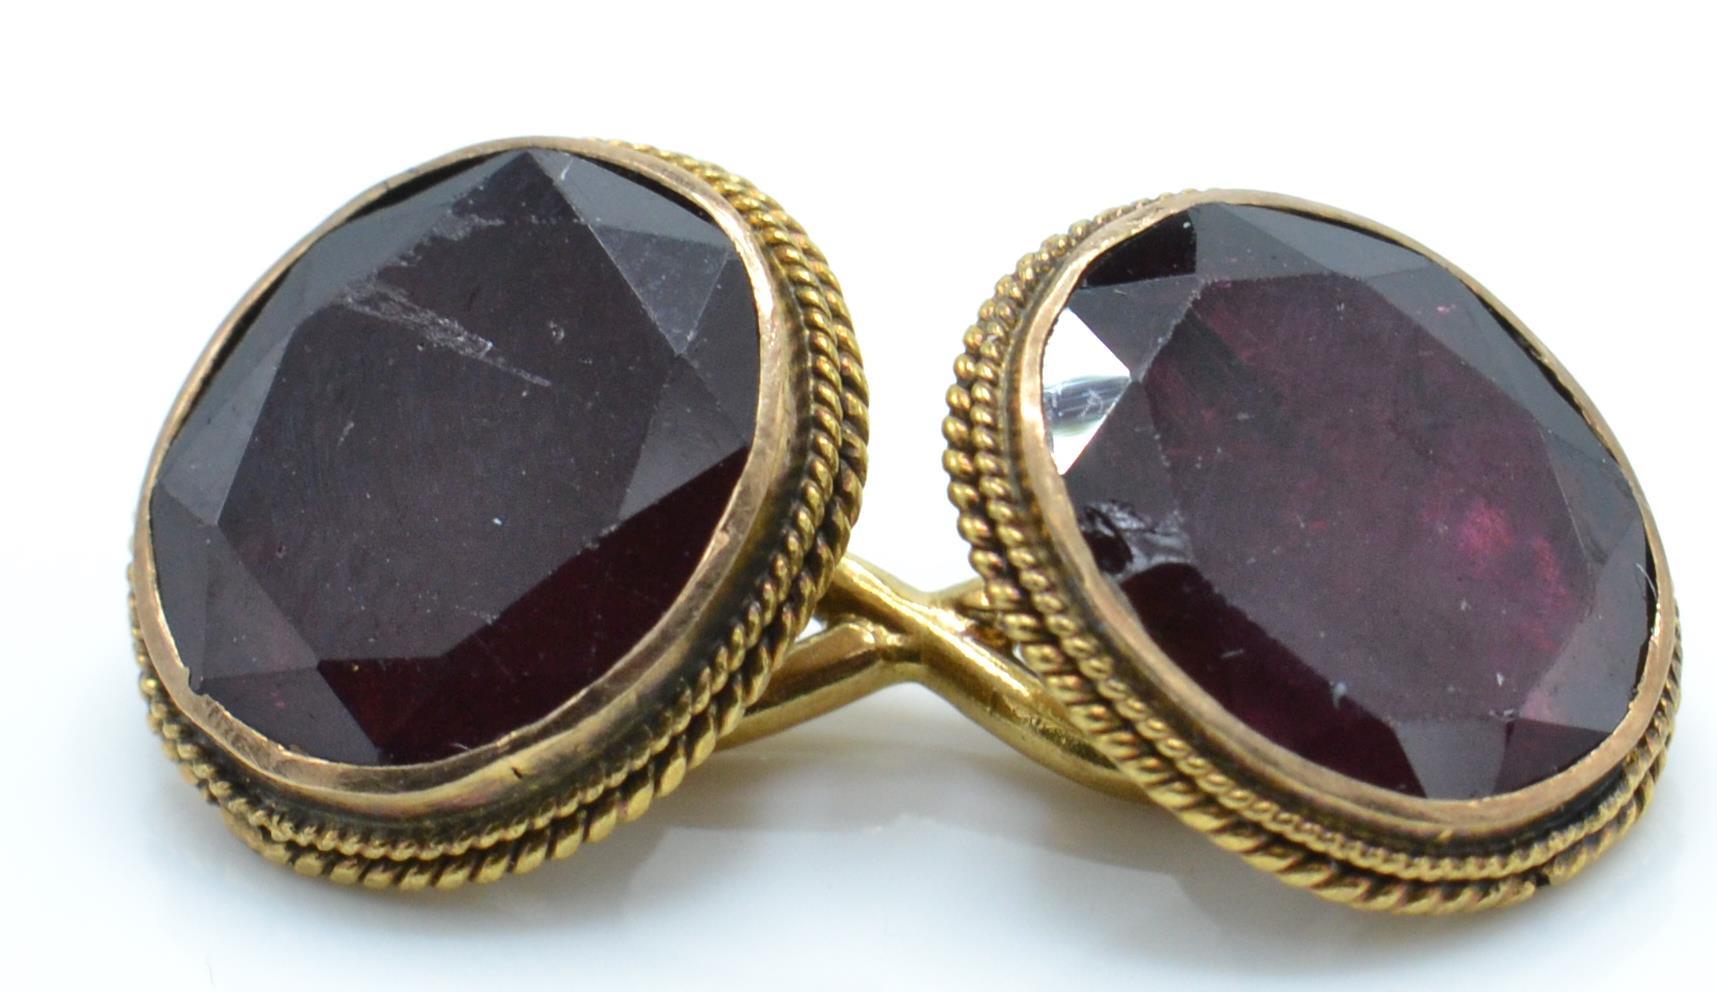 A pair of 15ct gold Victorian / Edwardian cufflinks set with facet cut garnets - Image 3 of 5